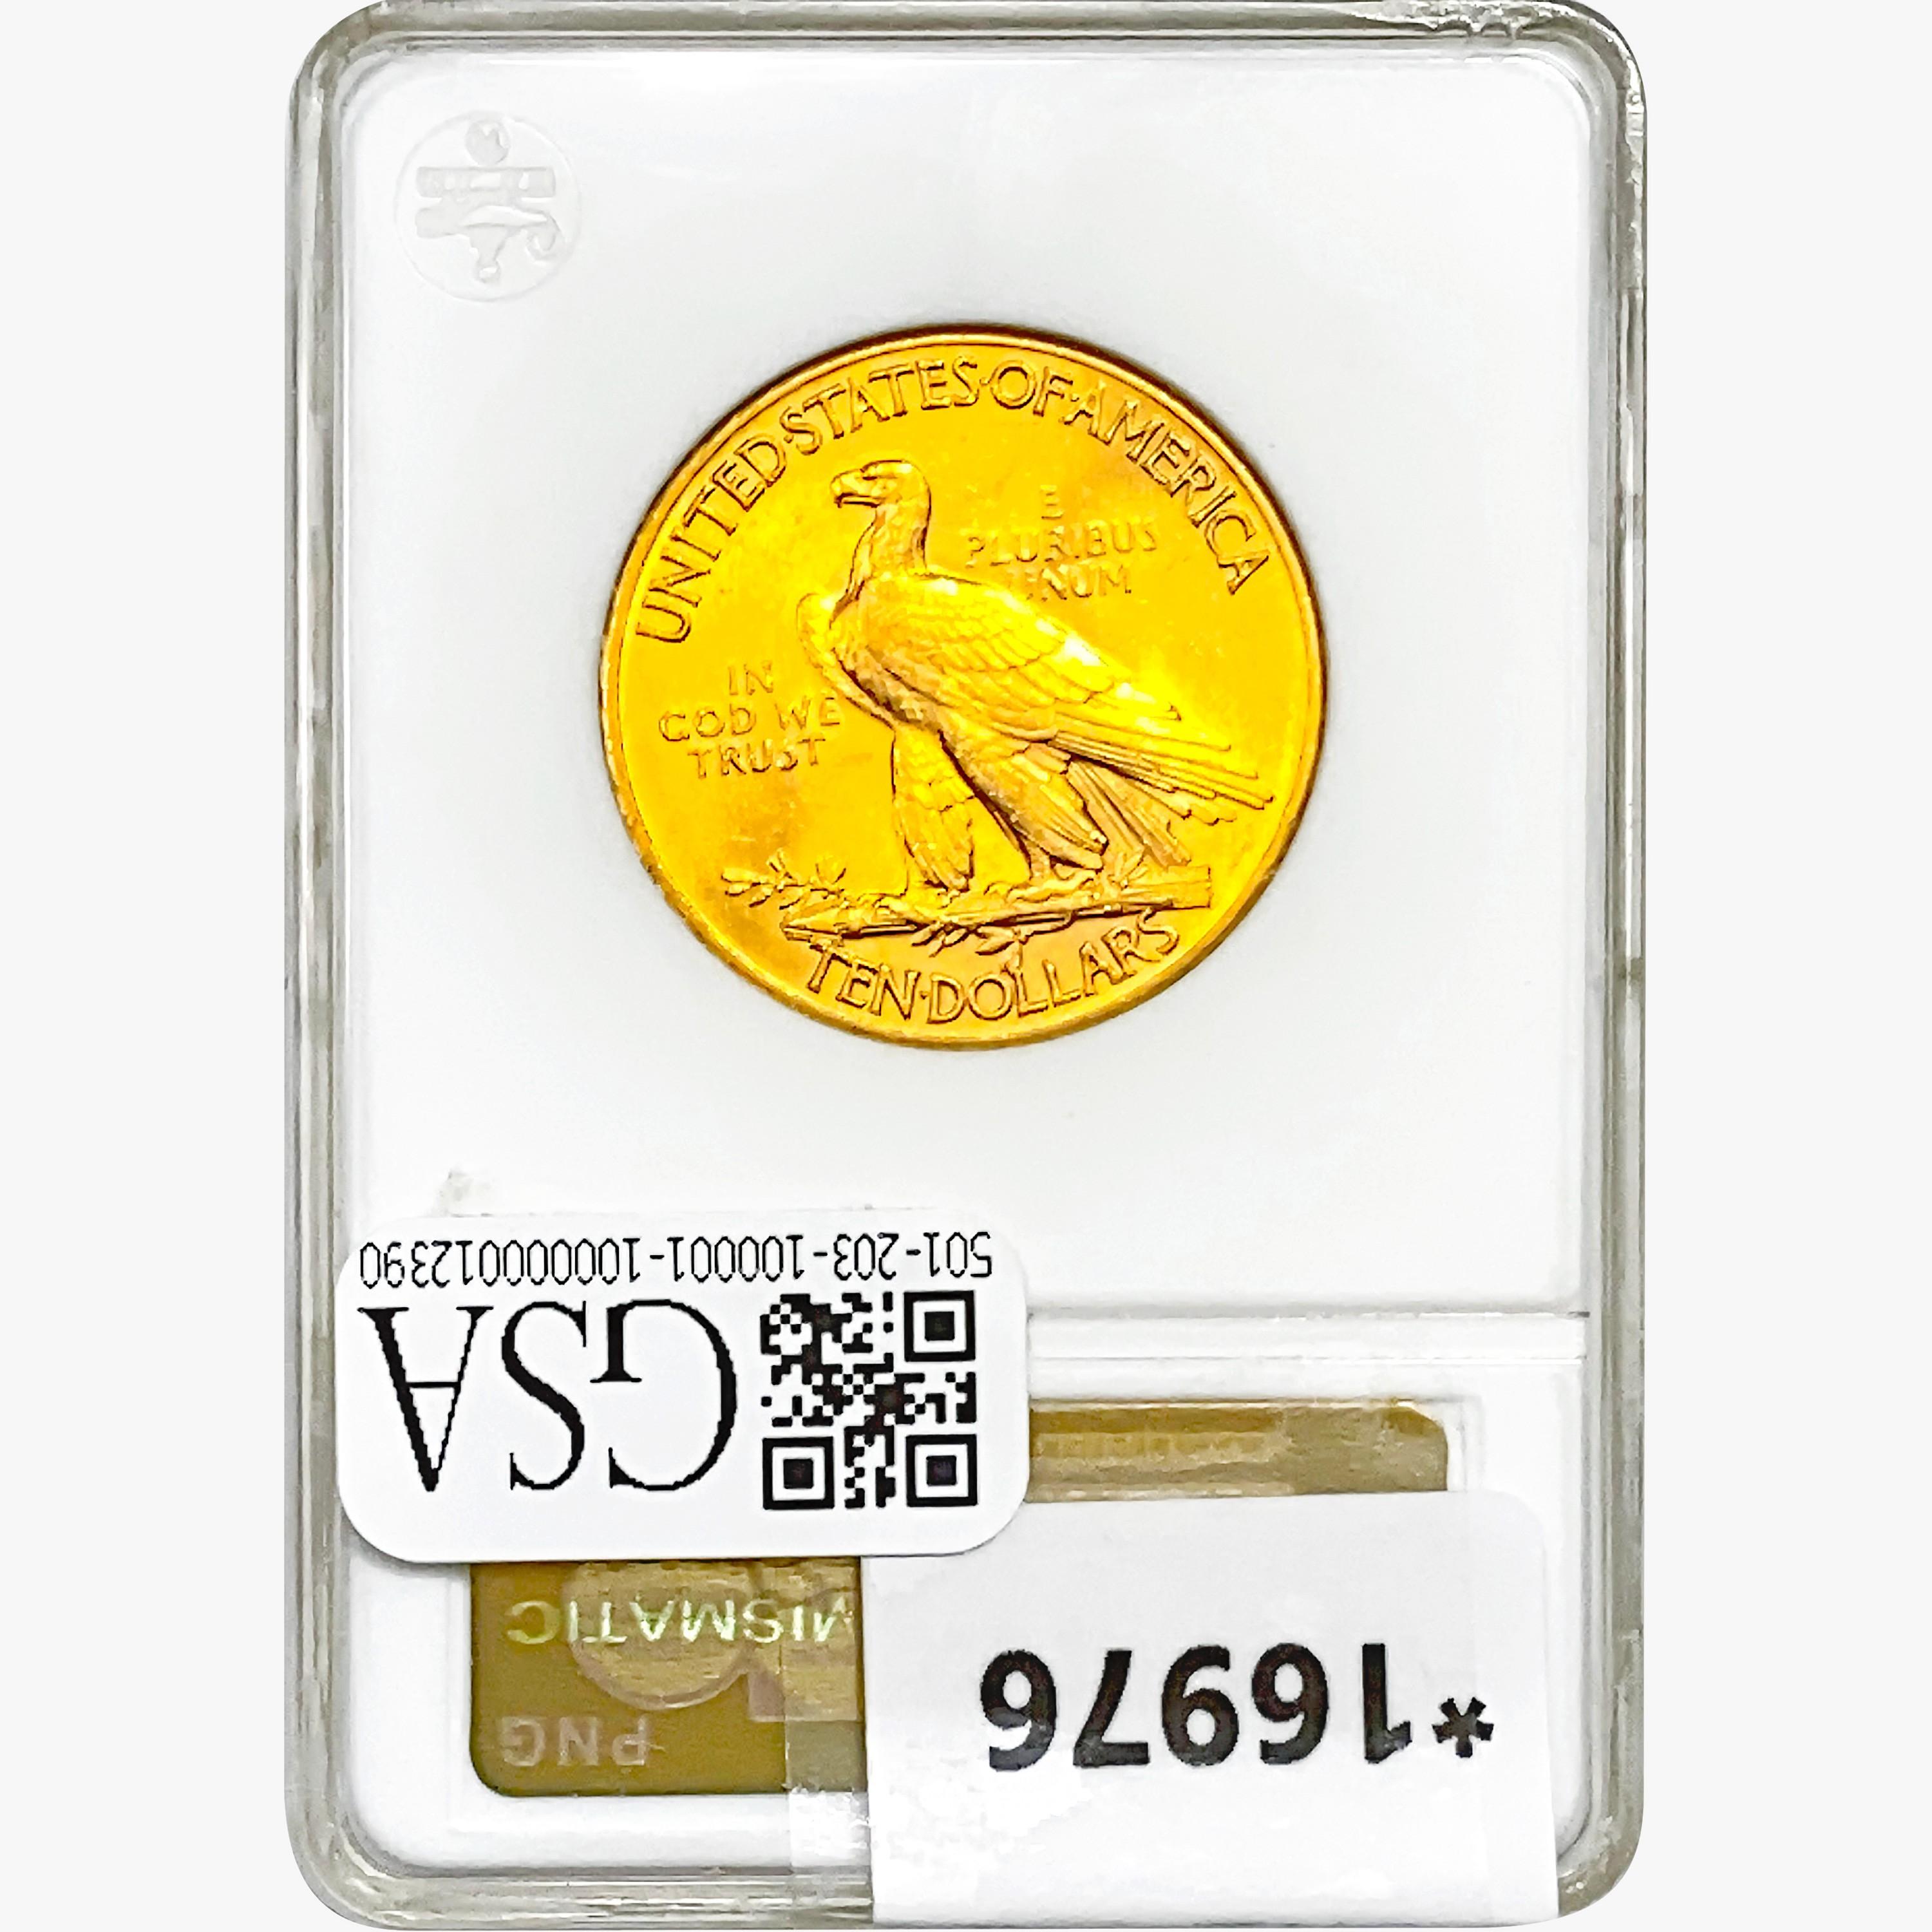 1932 $10 Gold Eagle PNG MS61